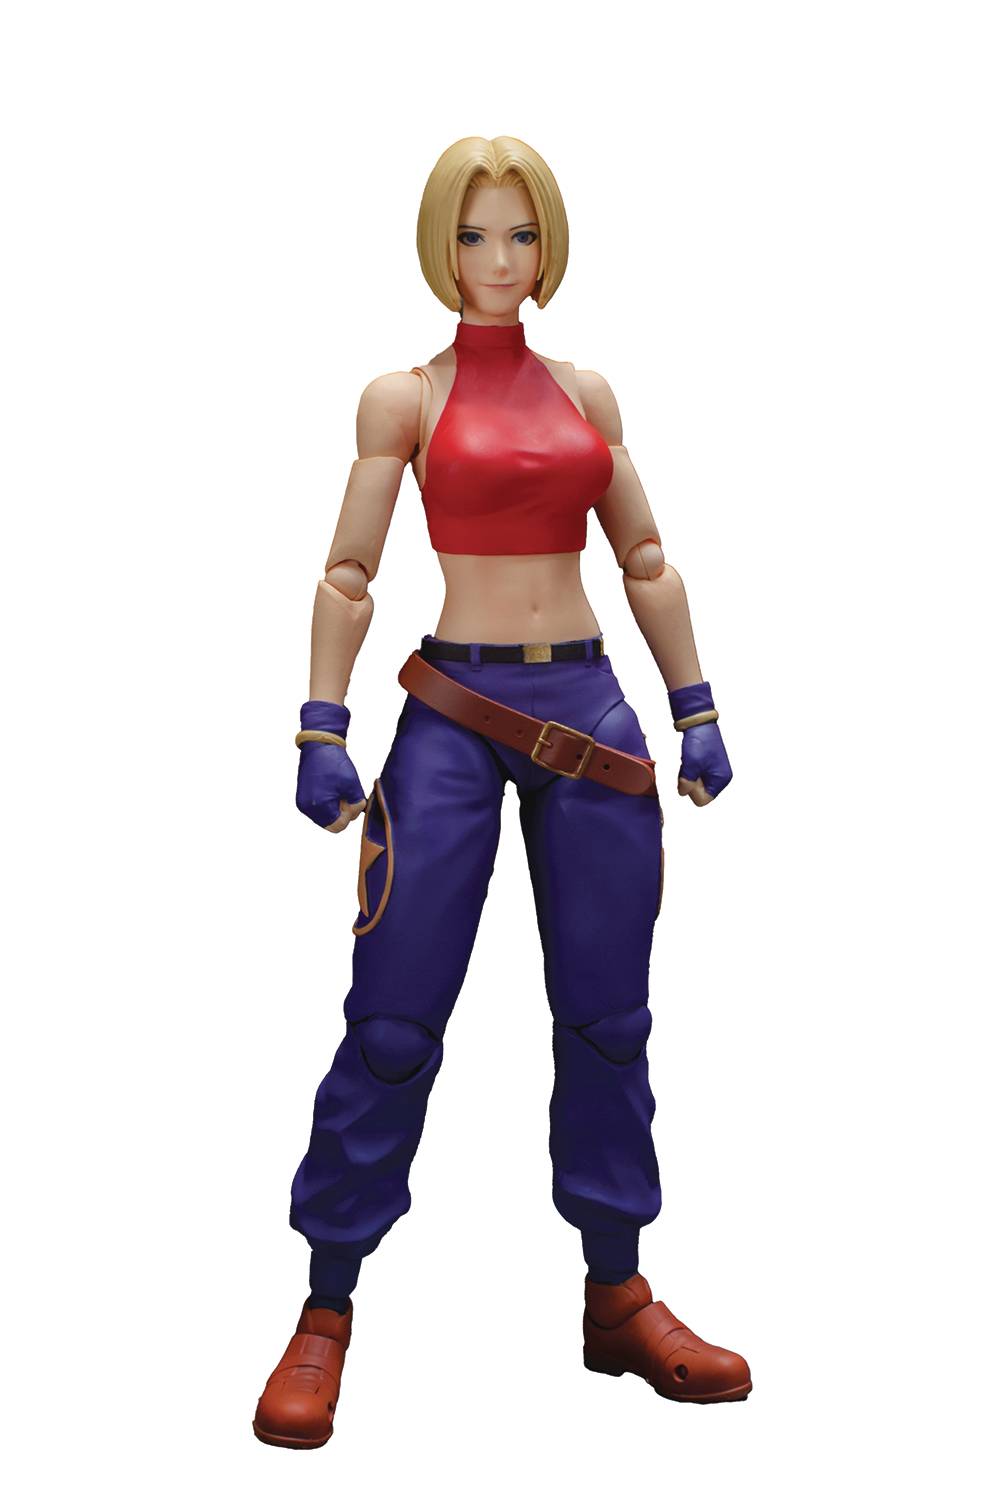 FEB229270 - STORM COLLECTIBLES KING OF FIGHTERS 98 BLUE MARY 1/12 AF (NE -  Previews World